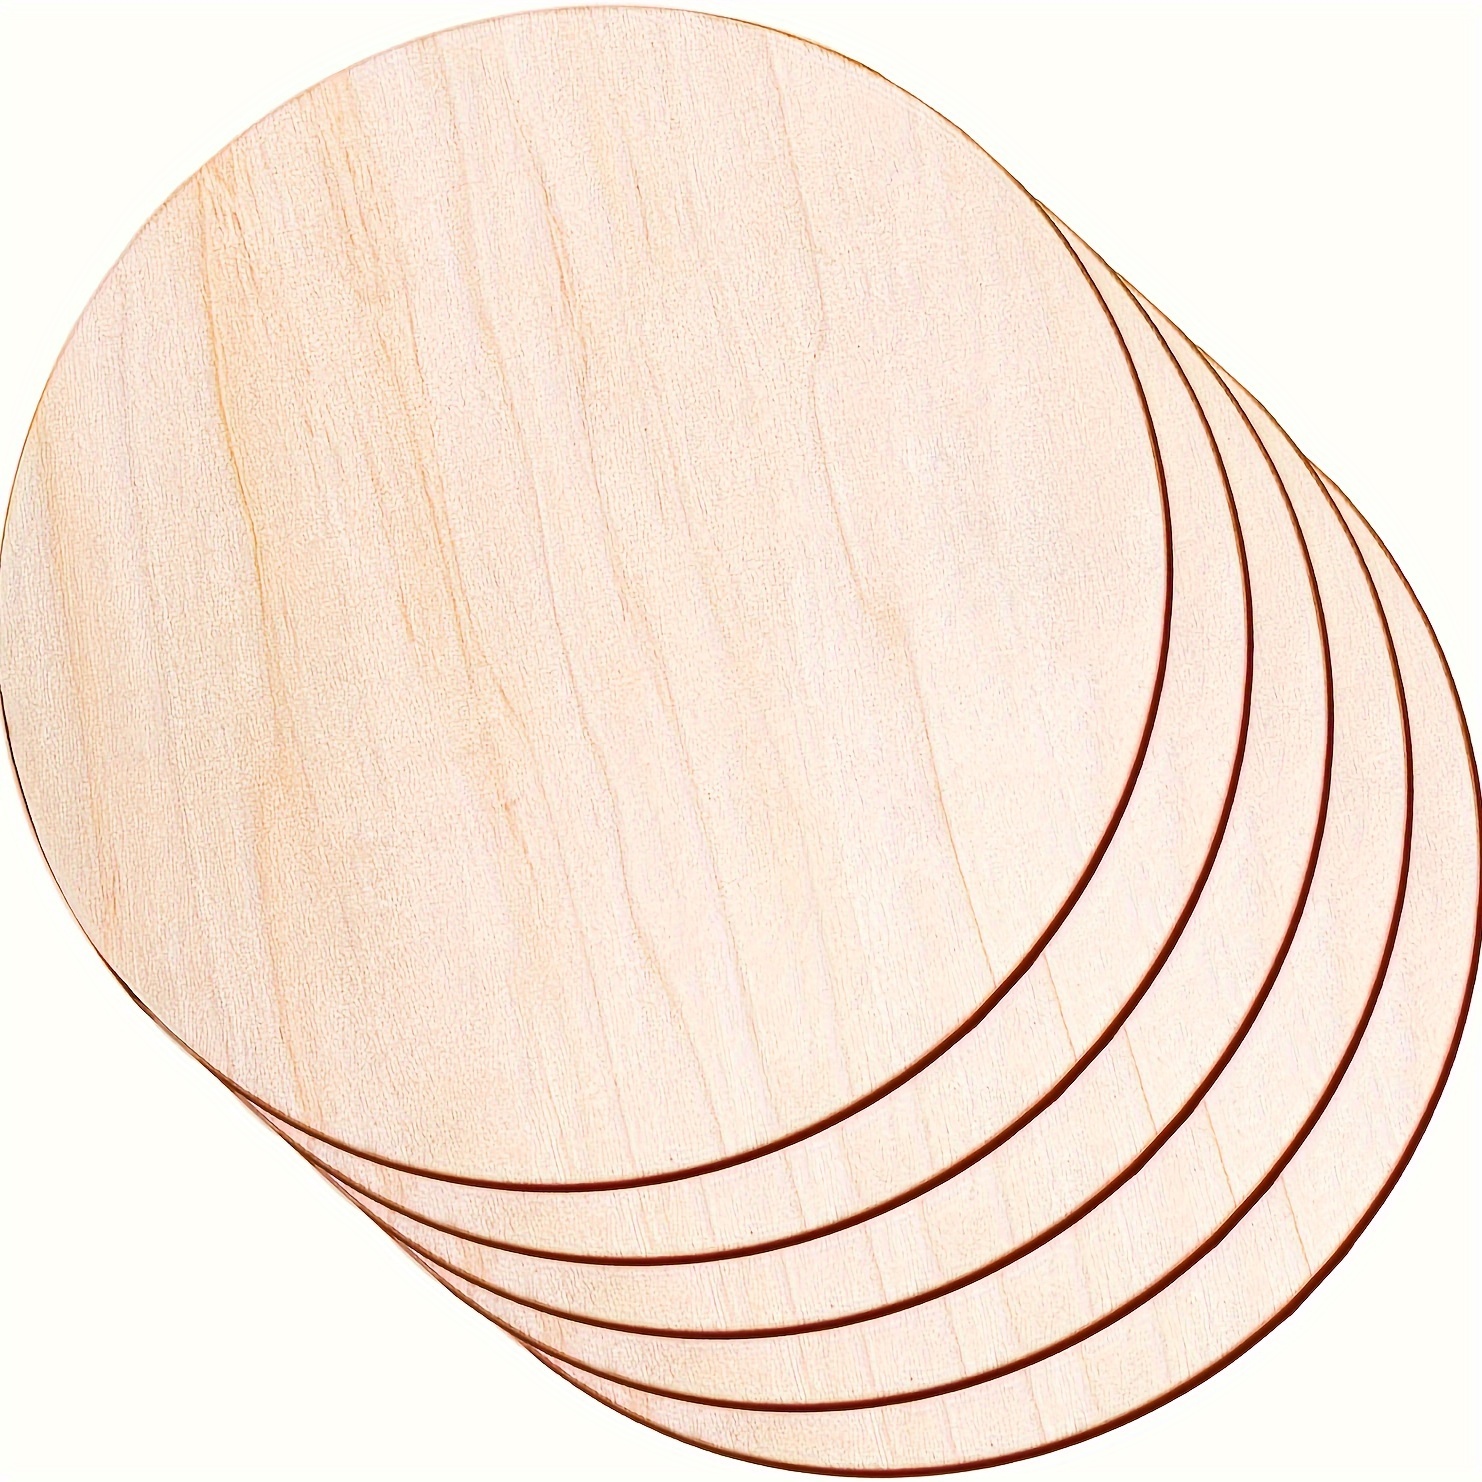 5pcs 30cm/11.8'' Plain Natural Blank Wood Discs Slices Cutouts for Crafts  Sign Plaque Home Decor Wooden Unfinished Round Circles